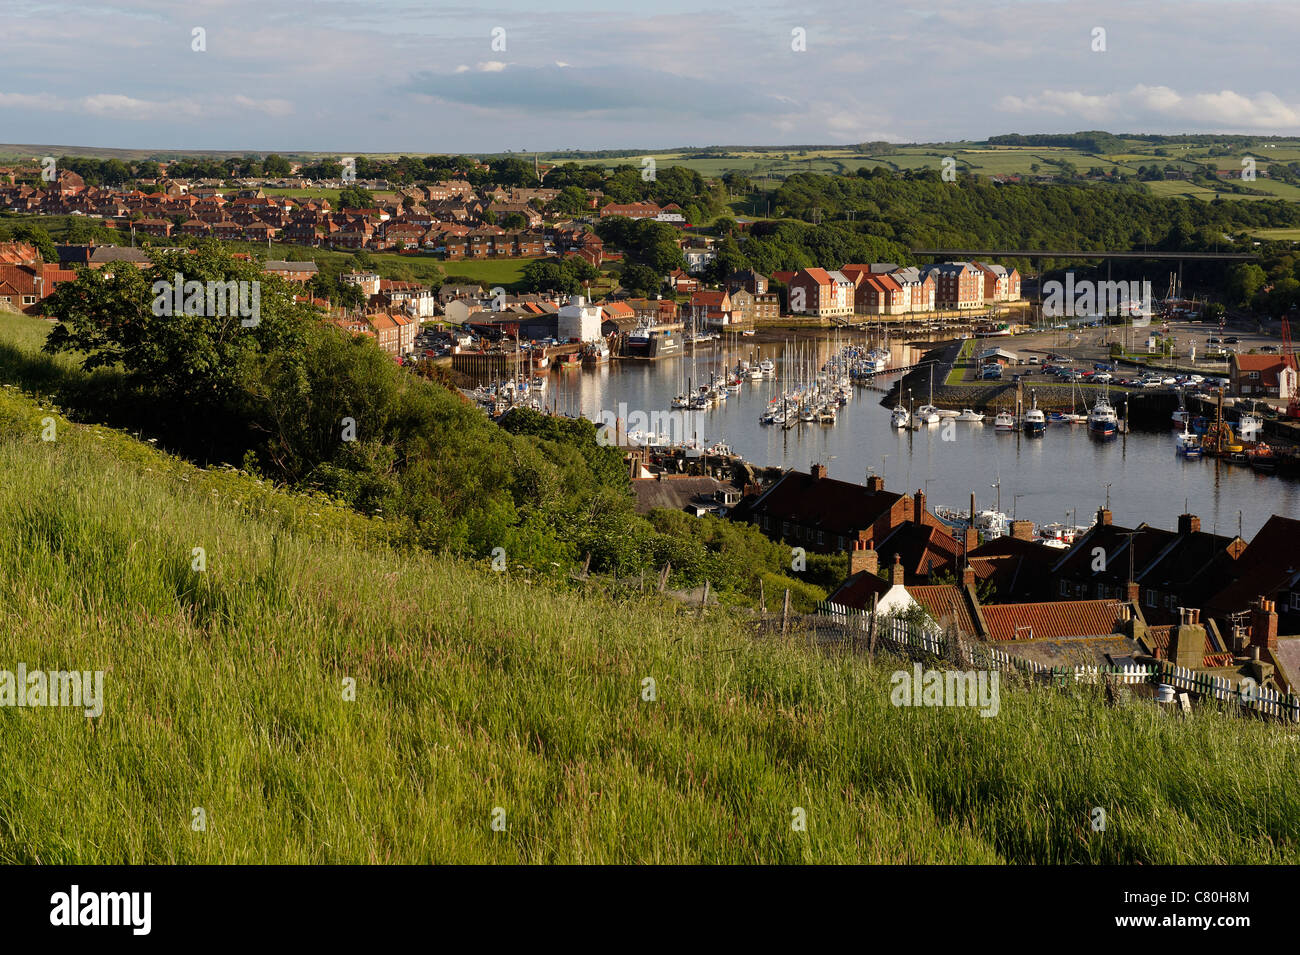 Whitby town & harbour, North Yorkshire, England Stock Photo